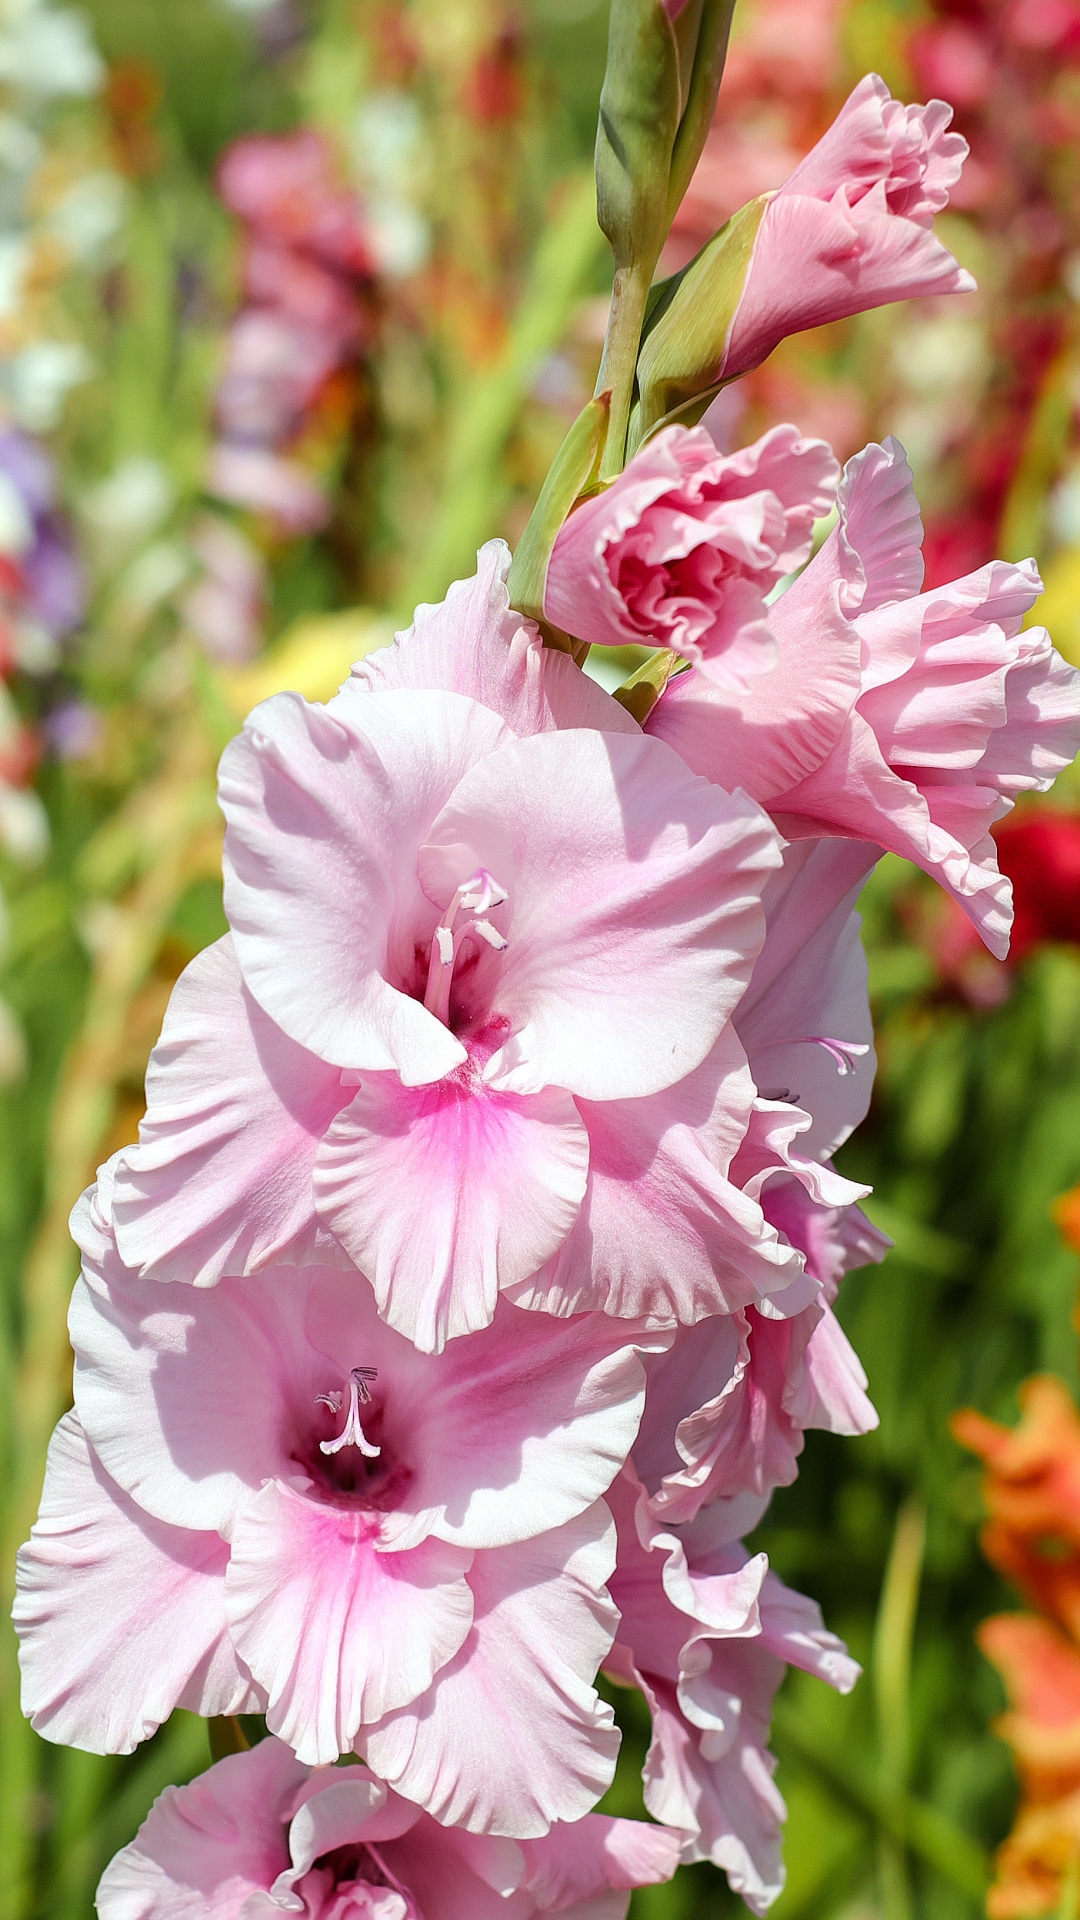 gladiolus, earth, nature, flower, pink flower, flowers 1080p